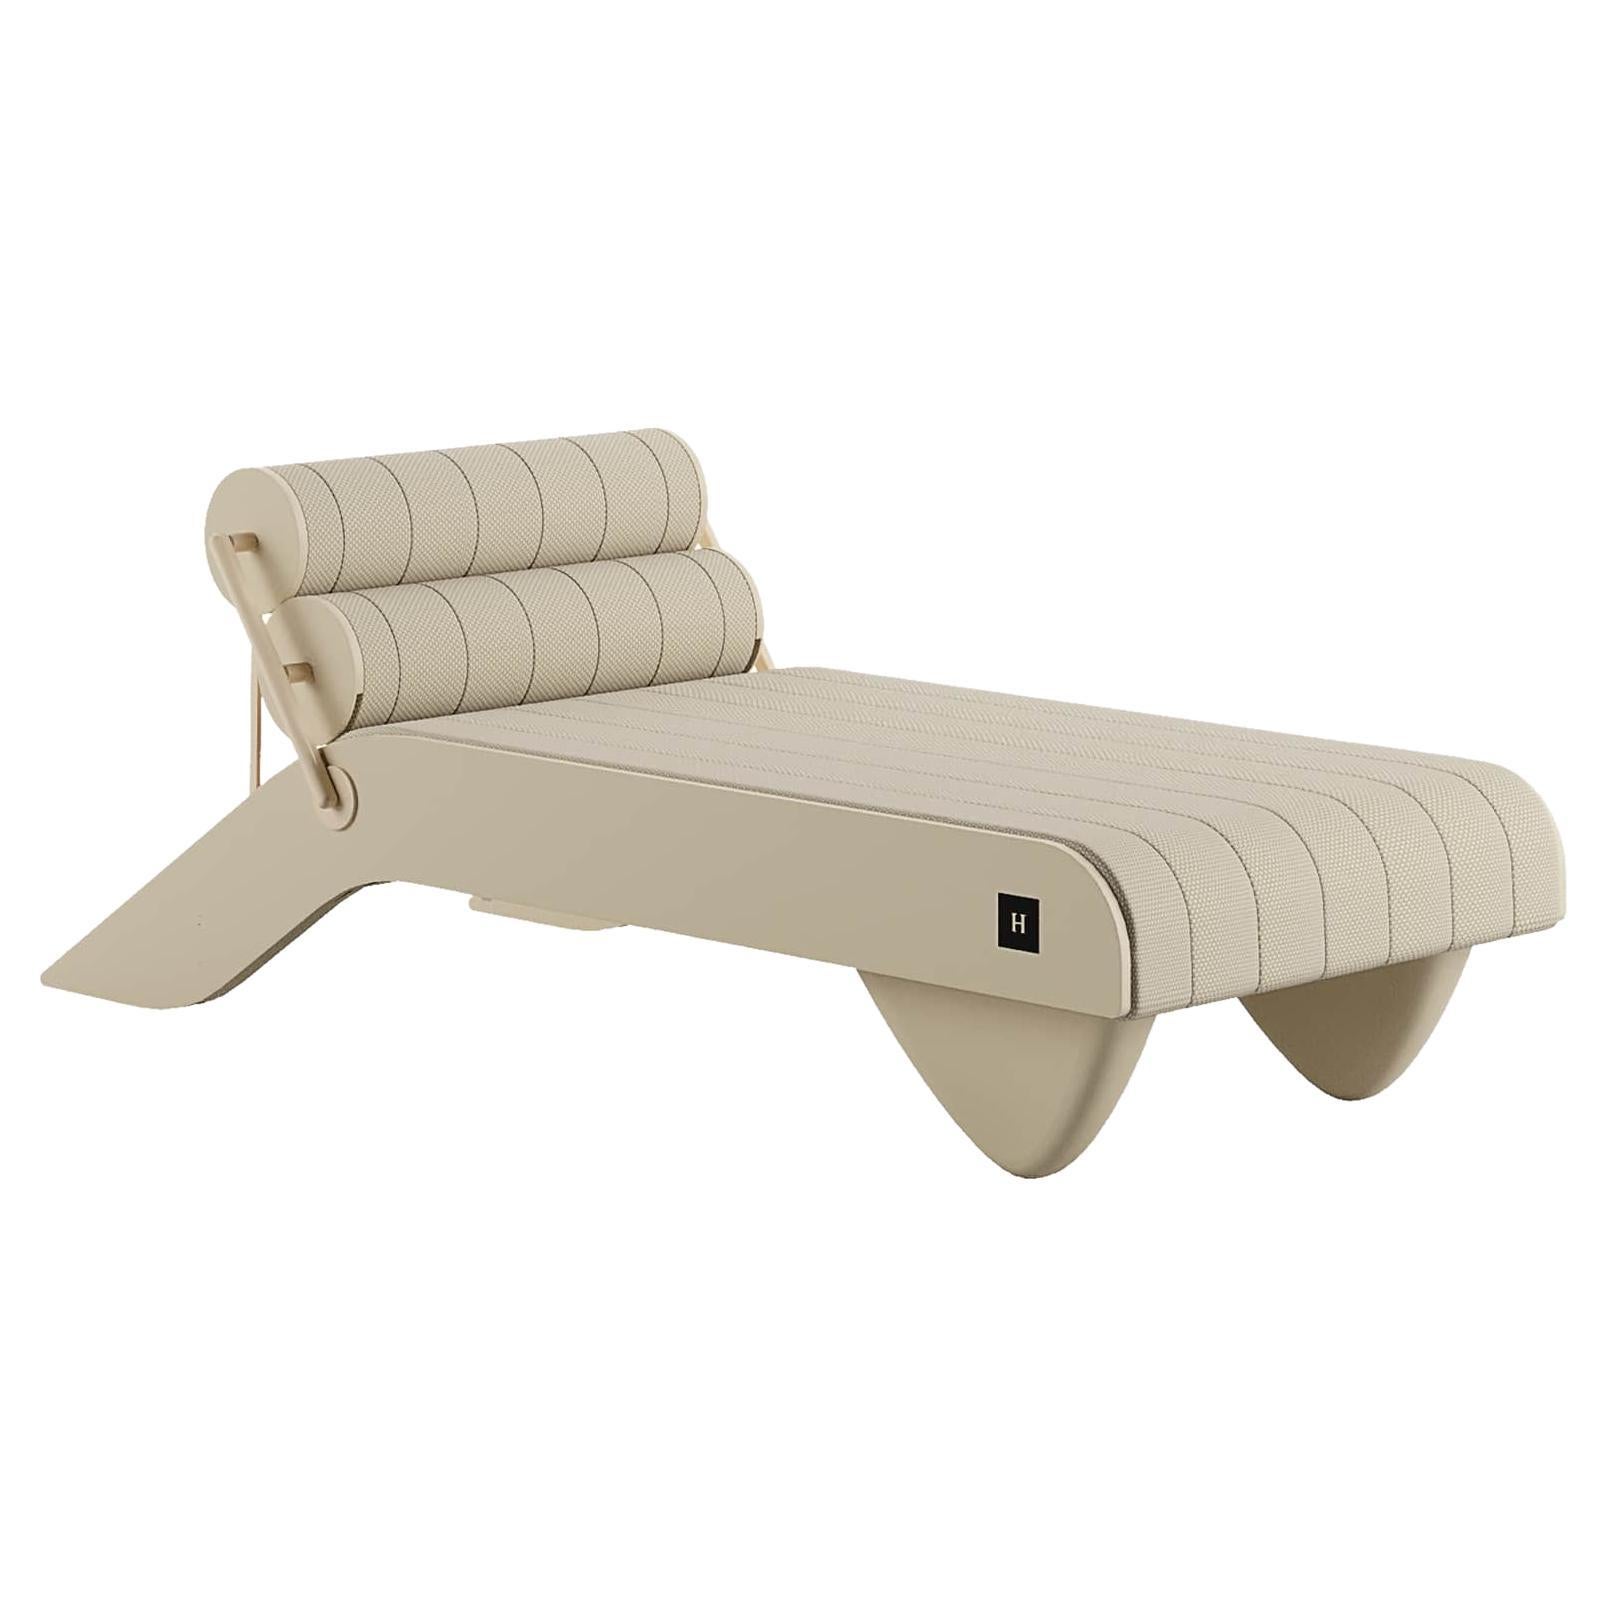 Modern Outdoor Reclining Daybed Sun Lounger Upholstered Beige Stripes For Sale